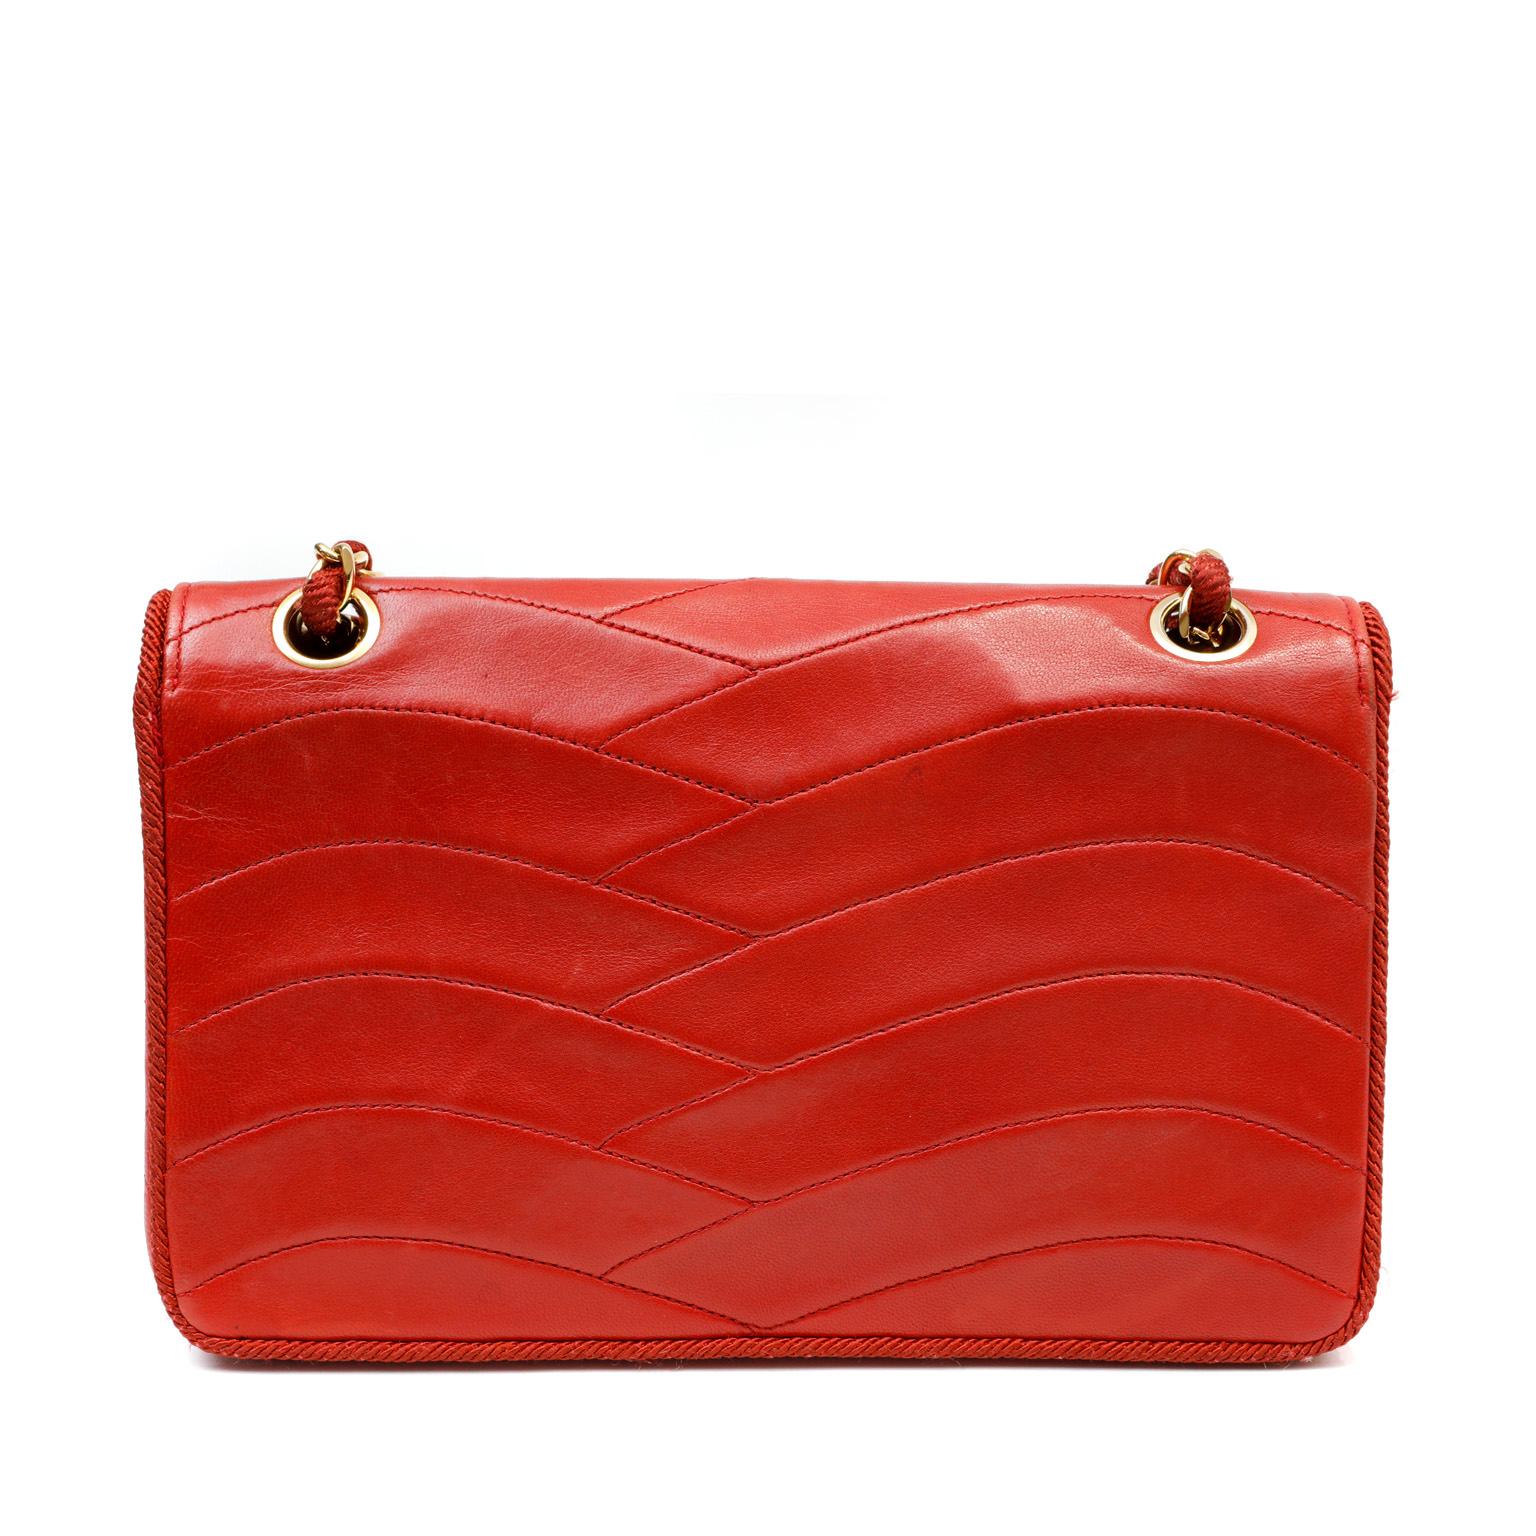 Chanel Vintage Red Leather Scallop Quilted Flap Bag  In Good Condition For Sale In Palm Beach, FL